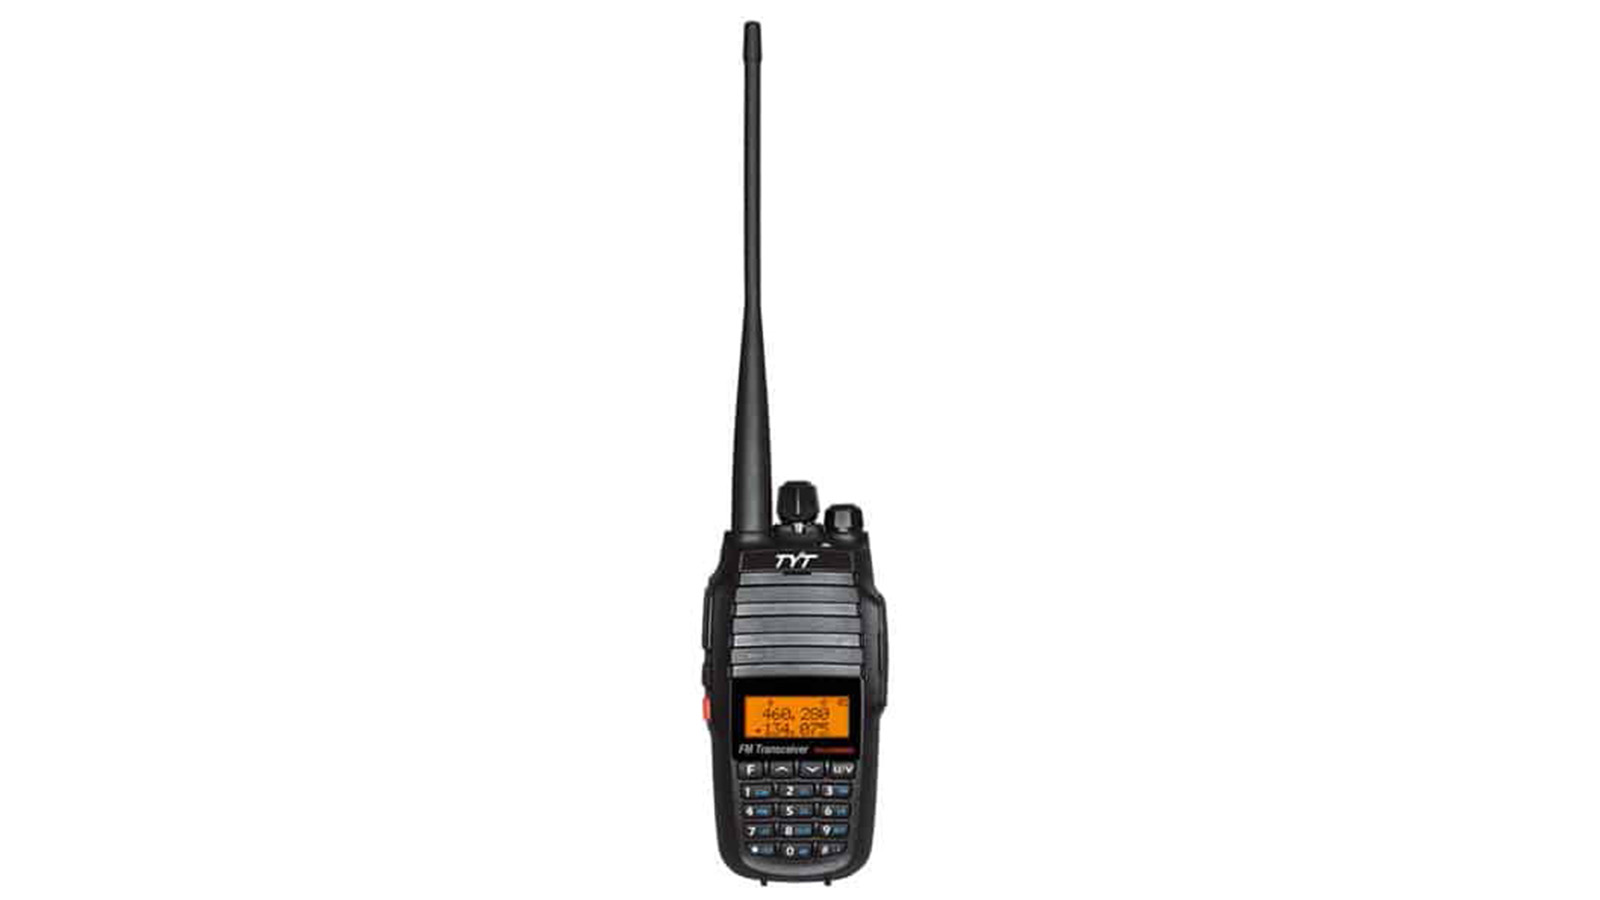 Hand-held dual-band amateur transceiver TYT | Integra-a